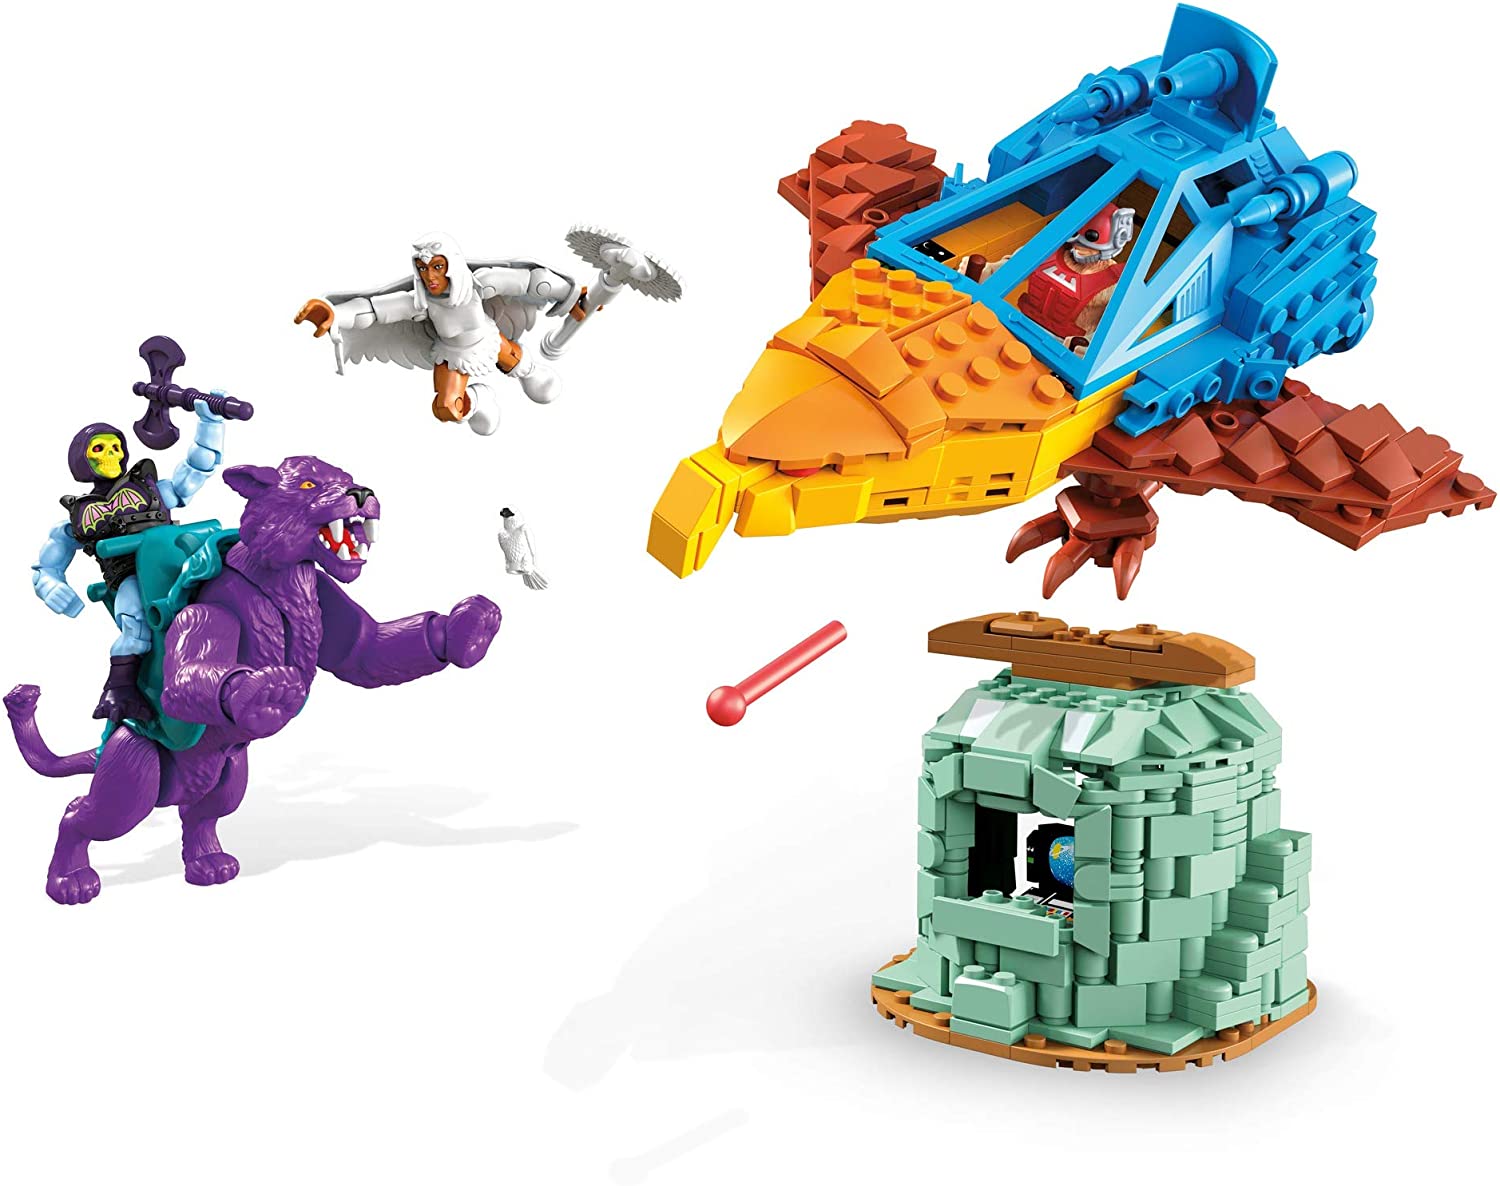 Panthor at Point Dread - Mega Construx Masters of the Universe Set